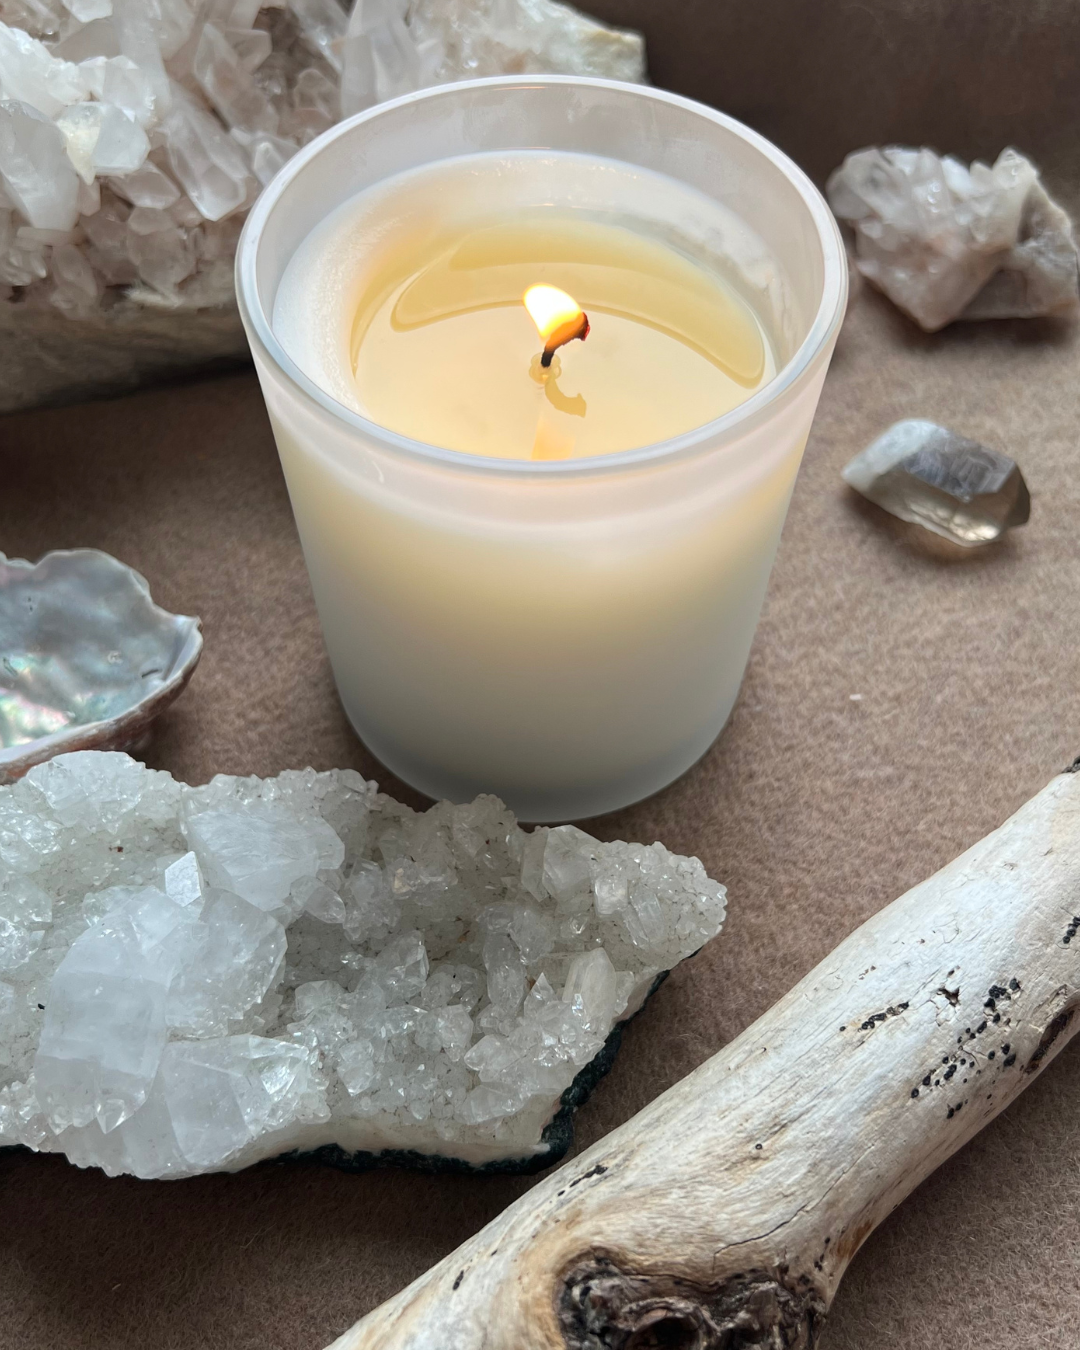 A candle with crystals surrounding it, calming ambiance, peace, serenity. 